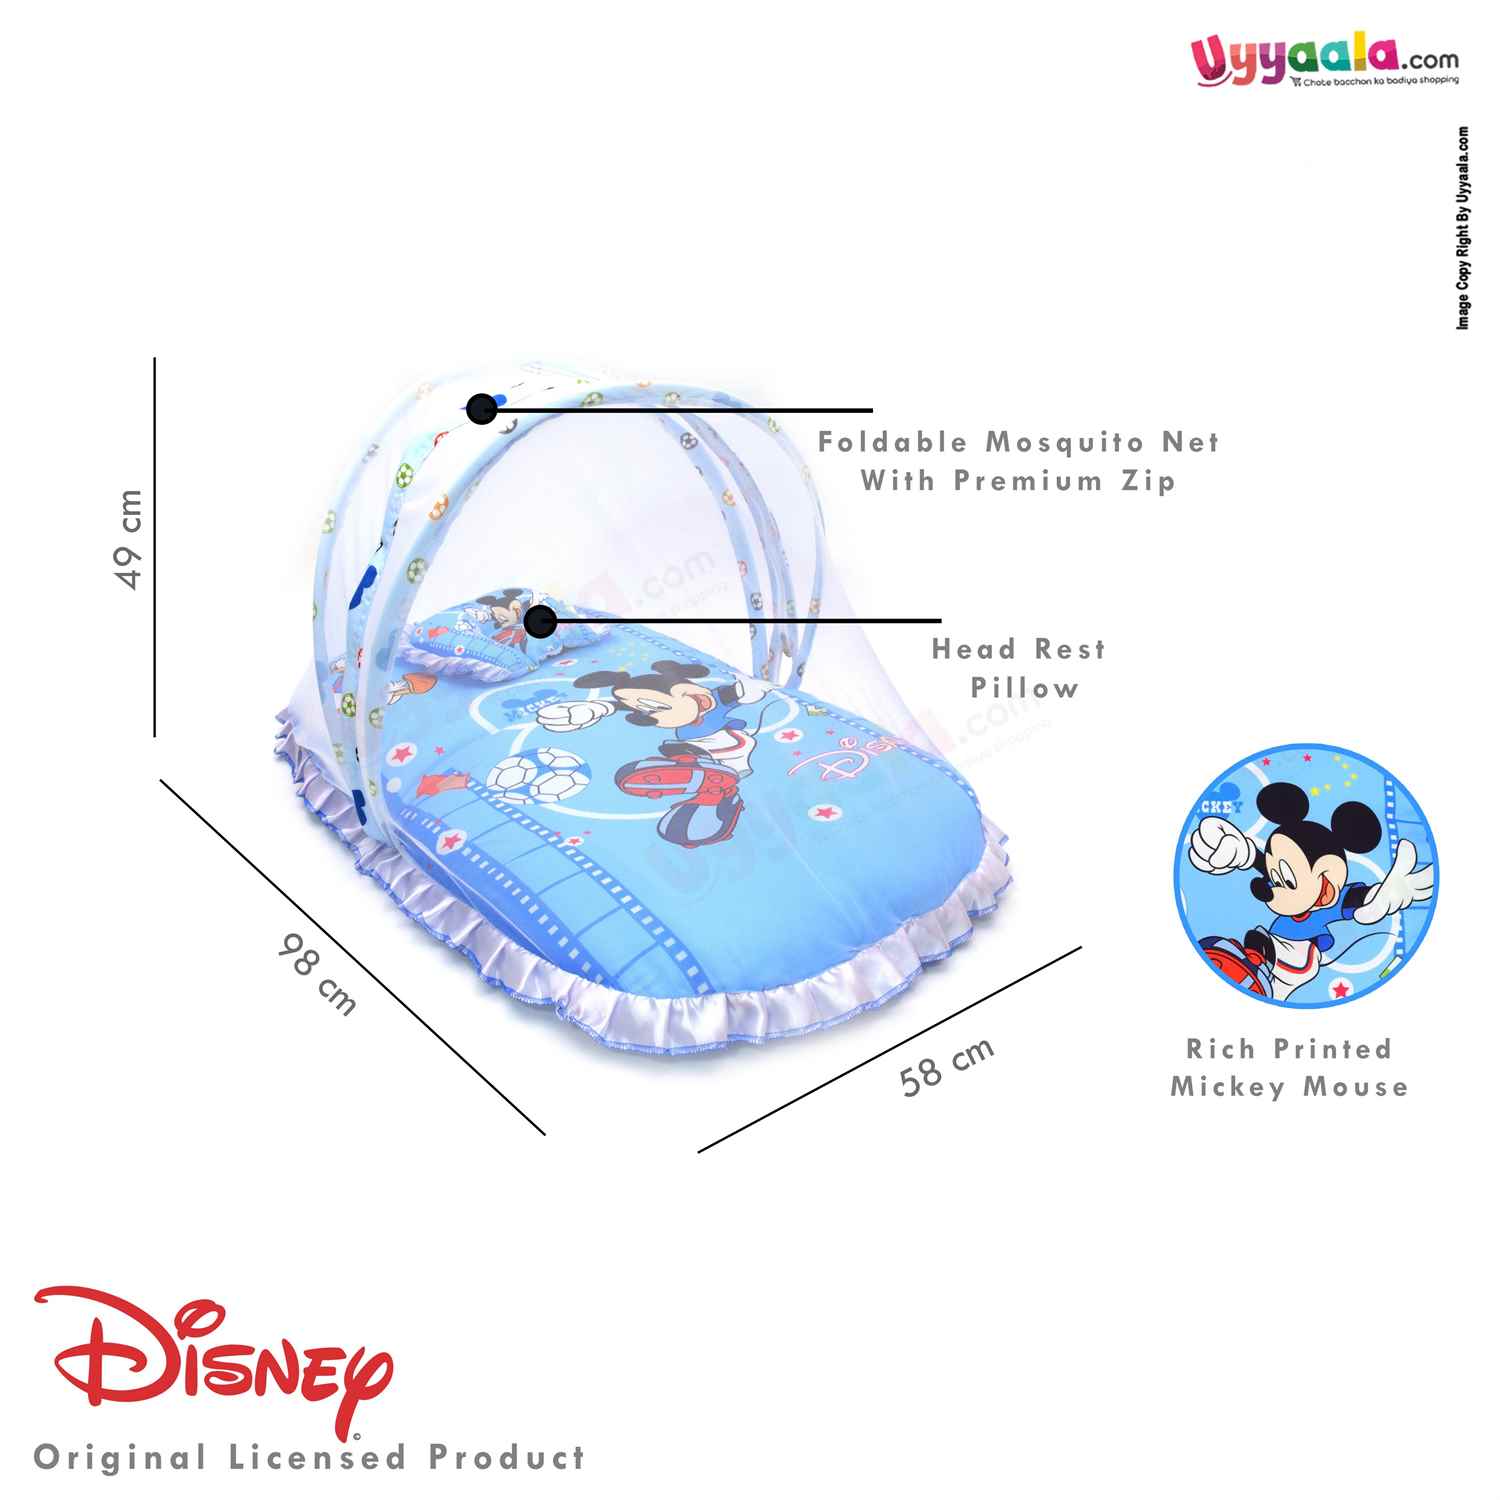 DISNEY Baby Cotton Bedding Set With Protection Net & Pillow Cotton, Mickey & Duck Print 0+m Age - Blue